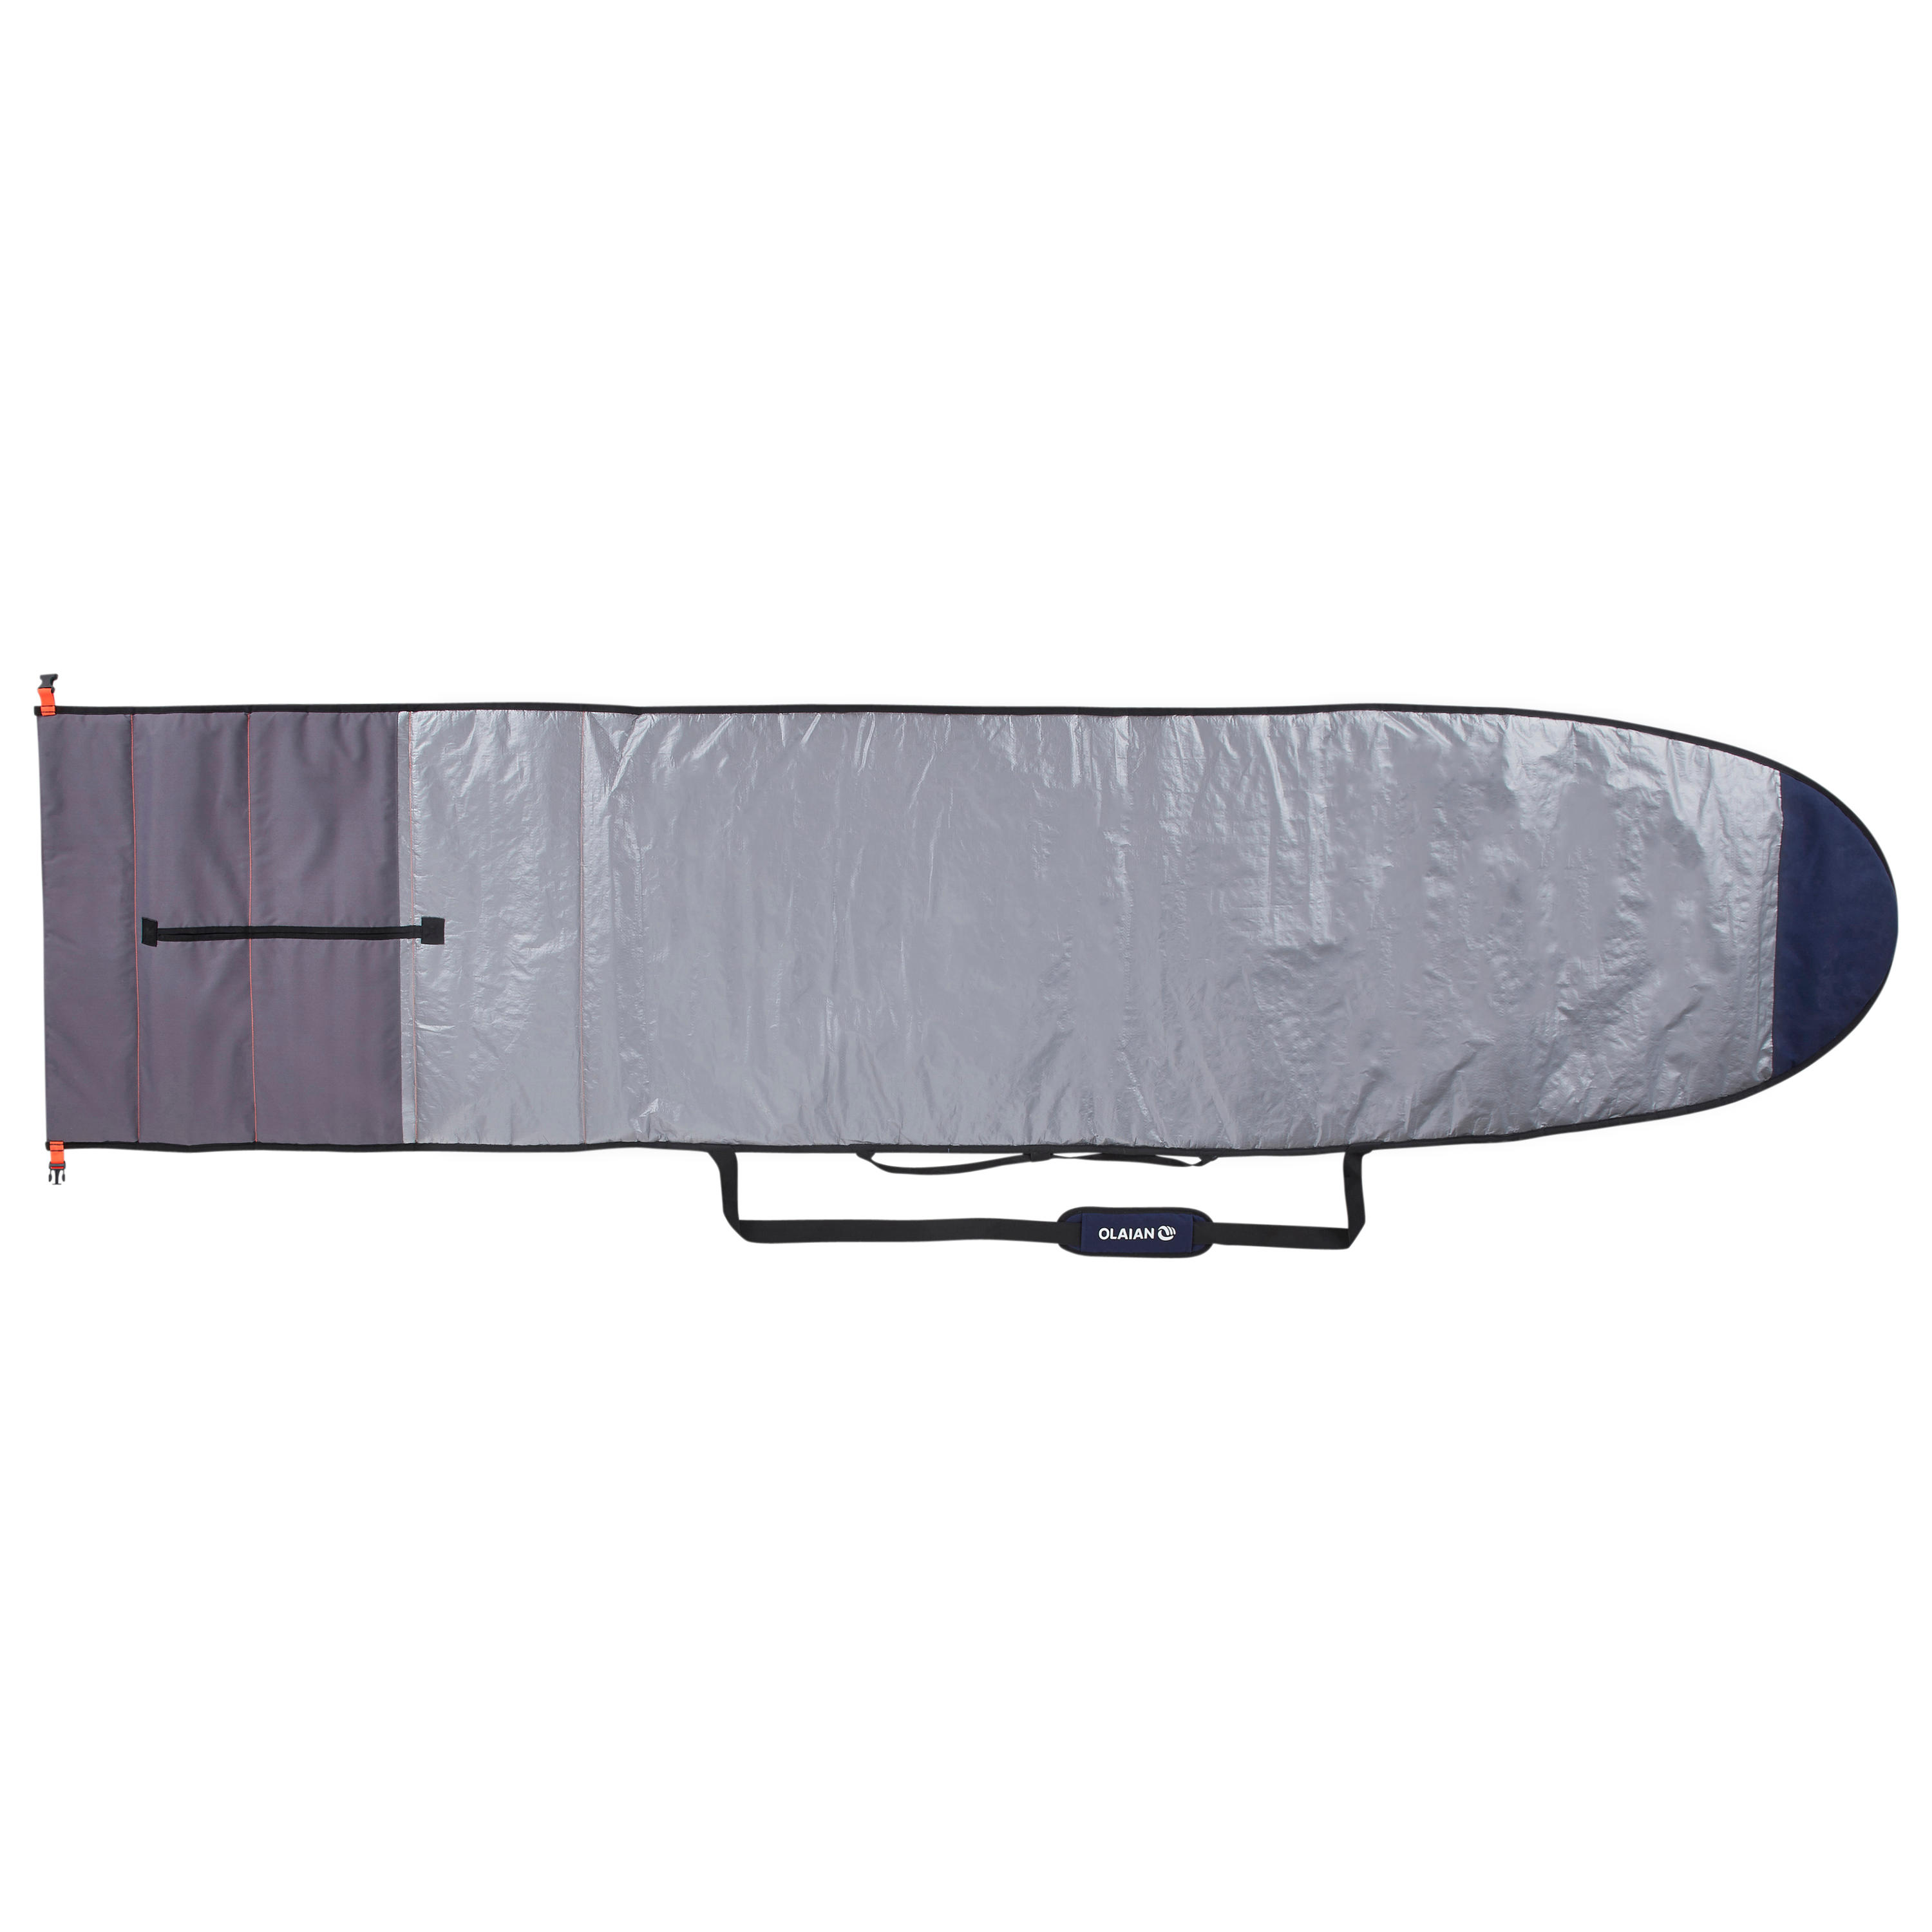 ADJUSTABLE COVER for boards 7'3 to 9'4 (221 to 285 cm) - OLAIAN